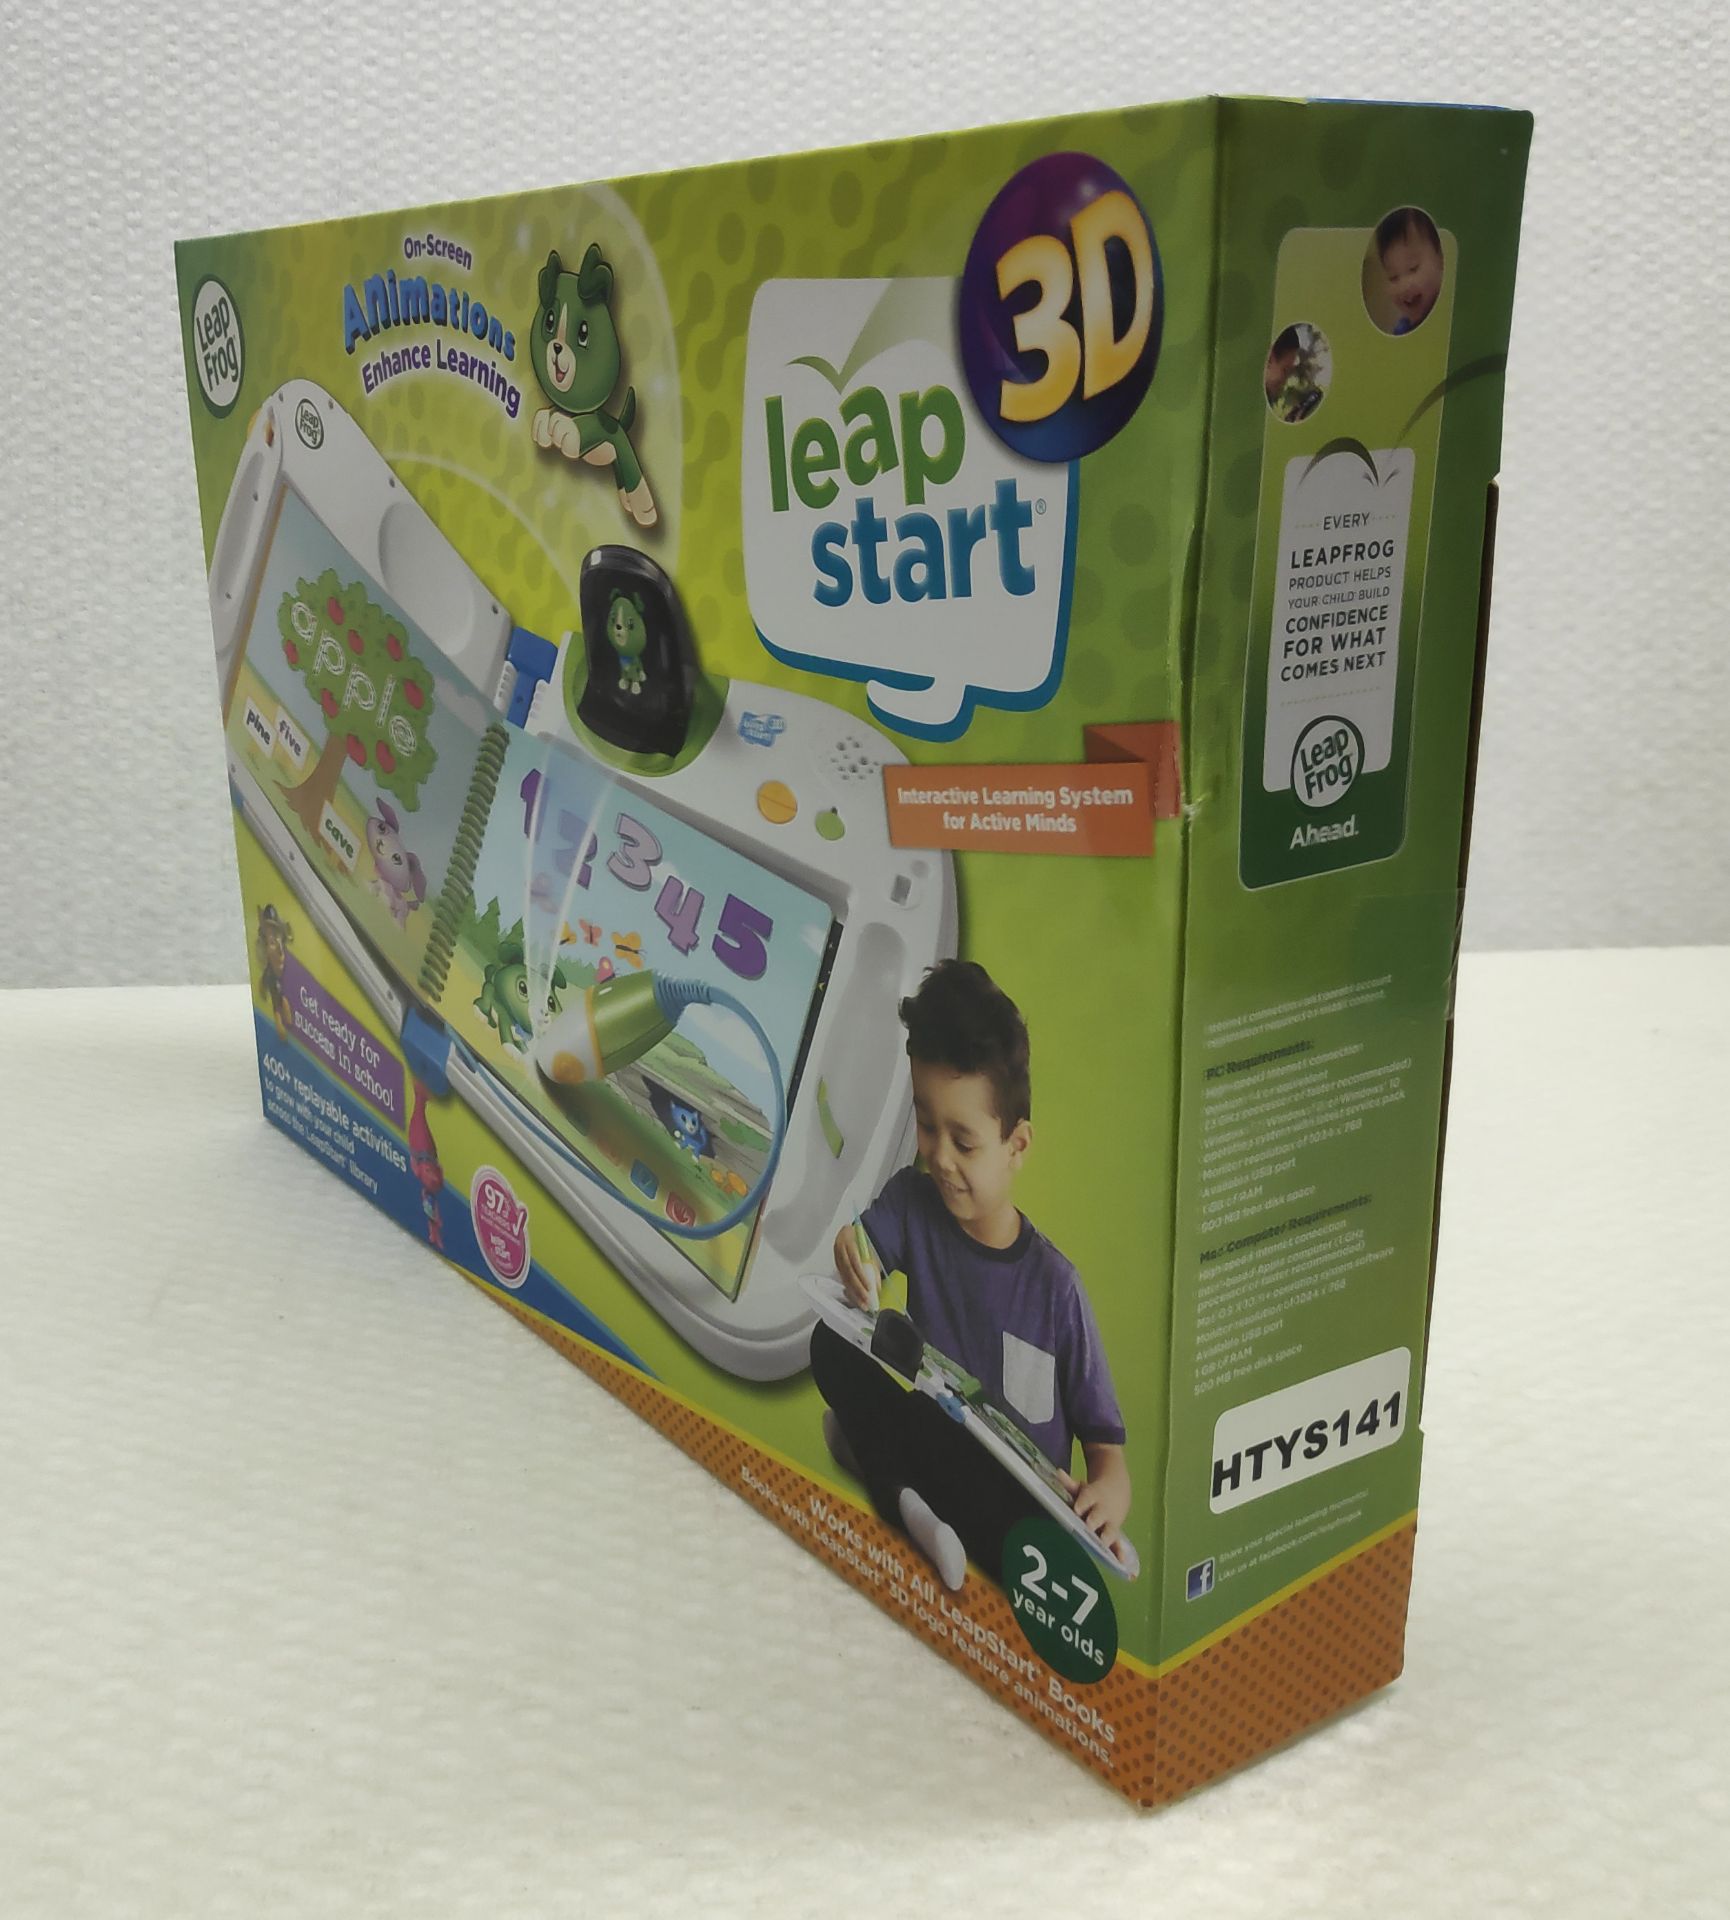 1 x LeapFrog LeapStart 3D Interactive Learing System - New/Boxed - Image 4 of 6